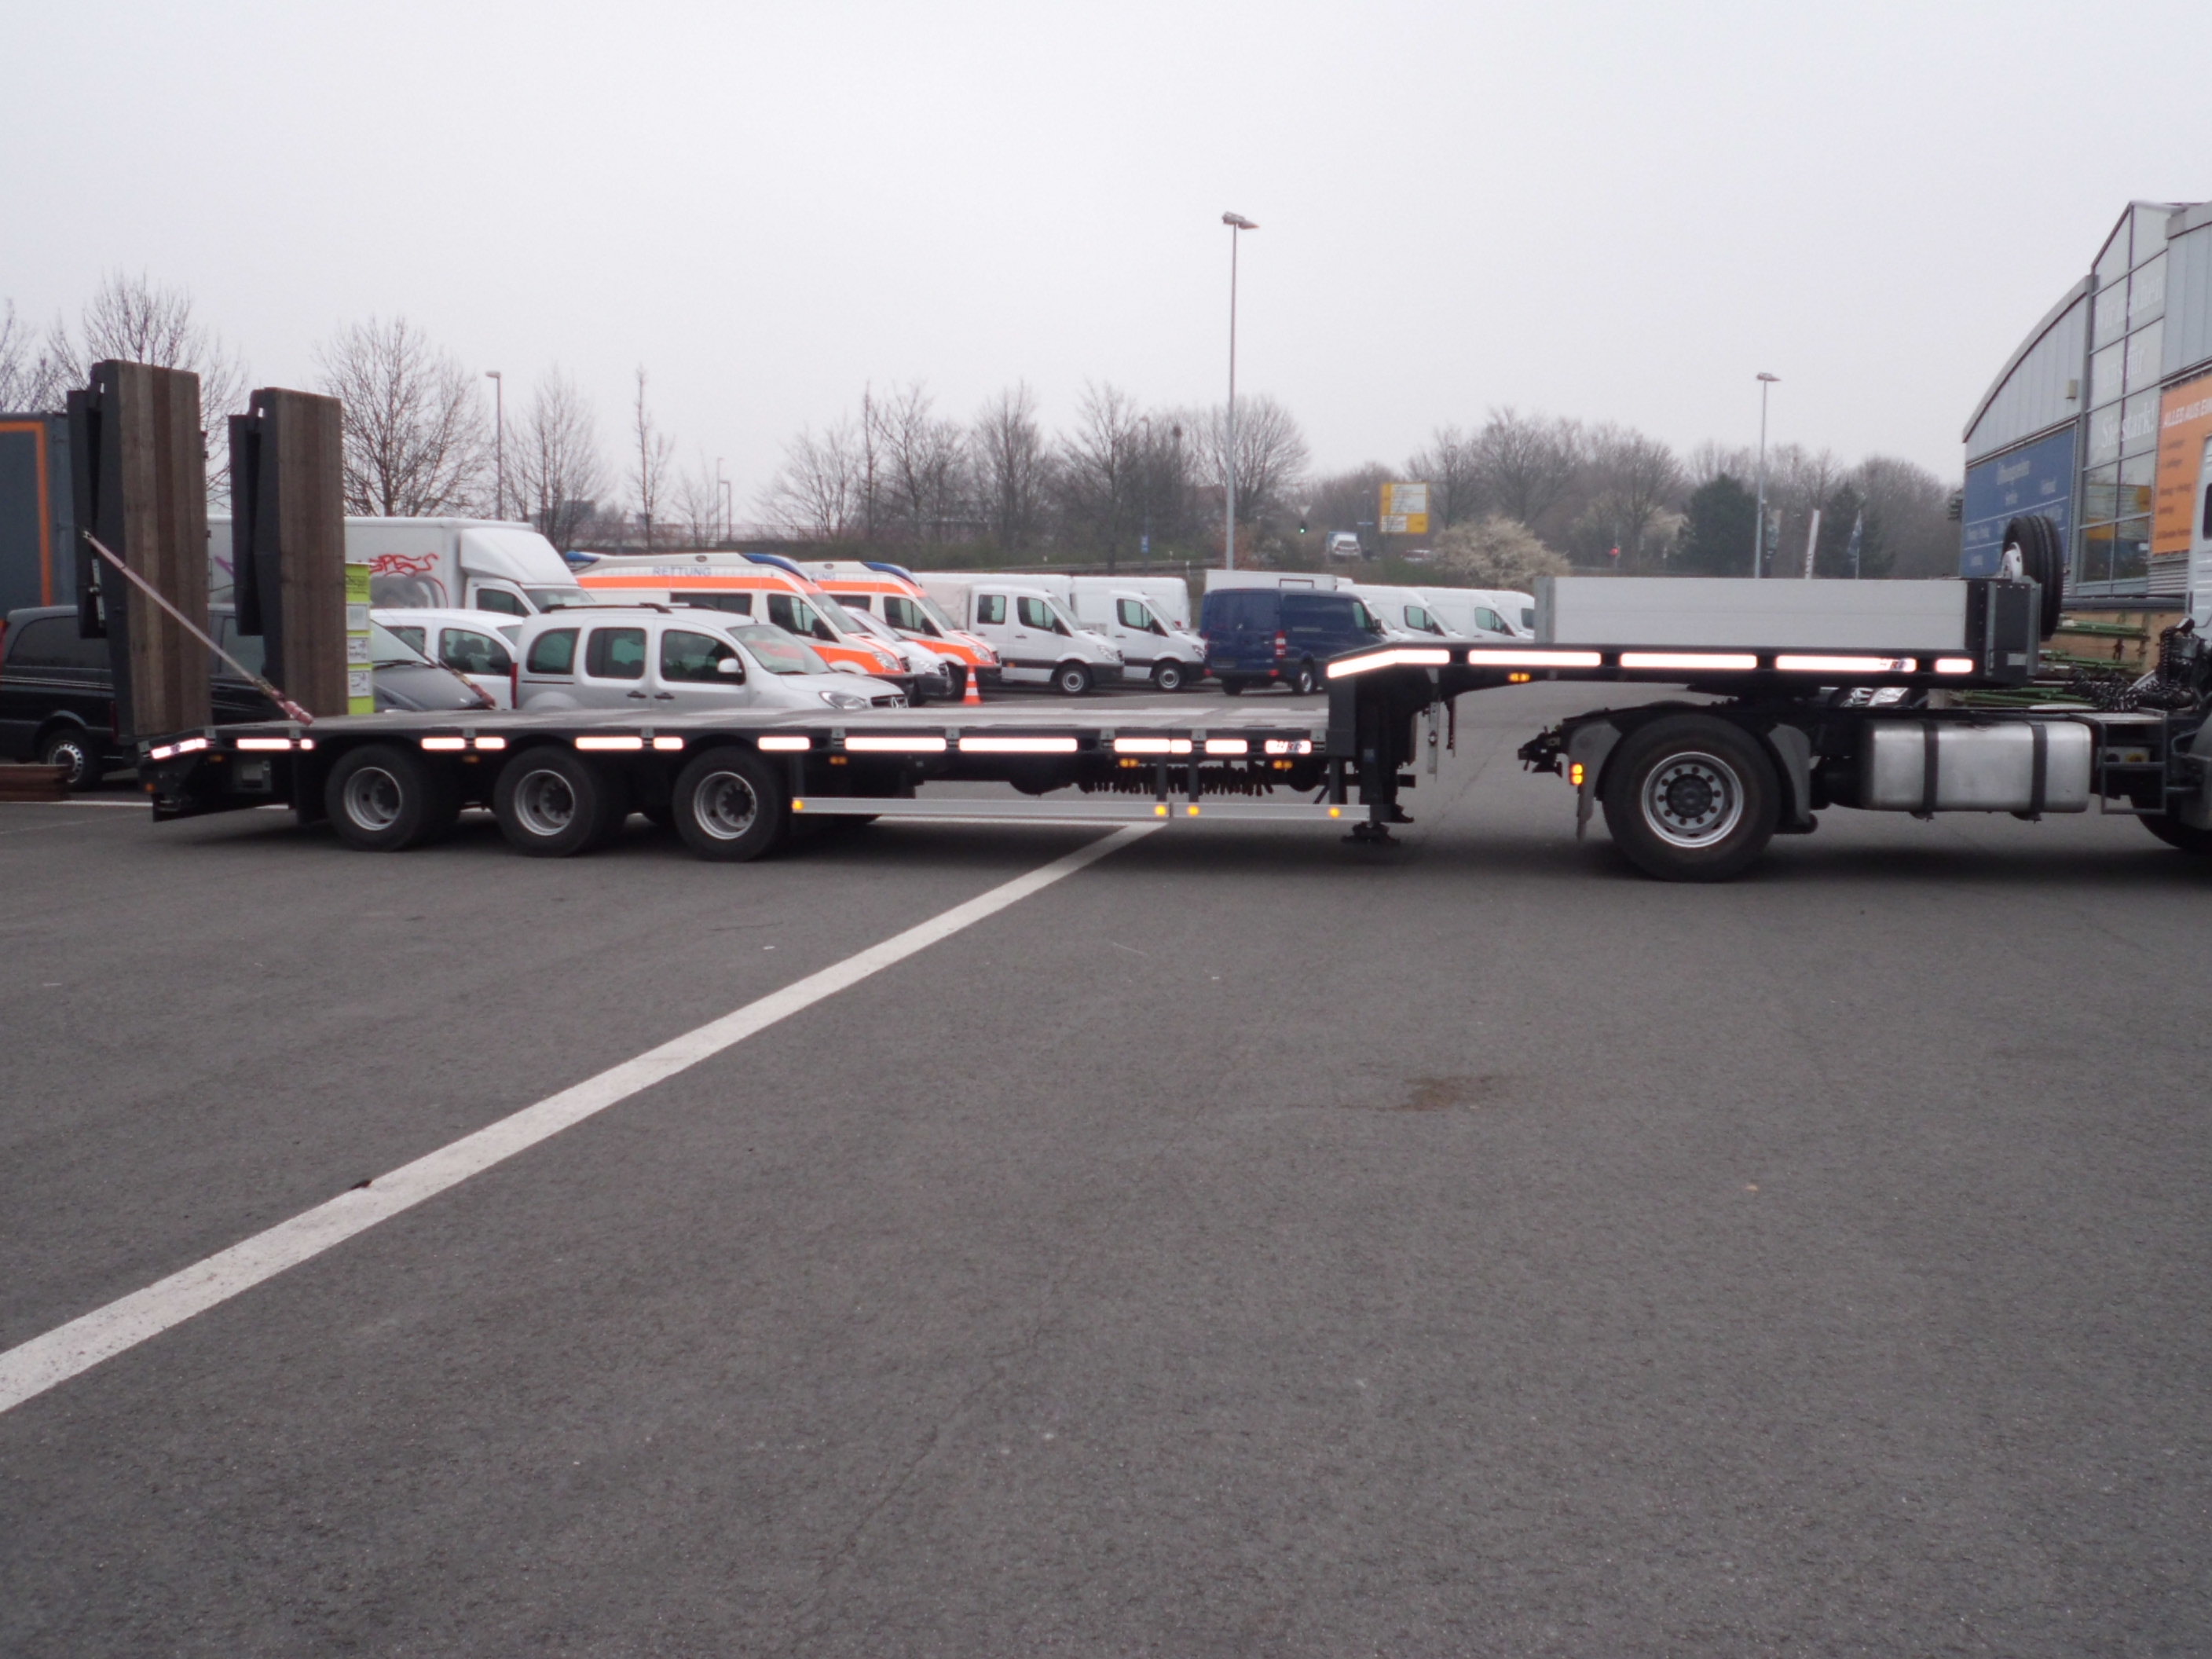 Now in stock: HRD 3-axle low deck trailer with hydraulic ramps